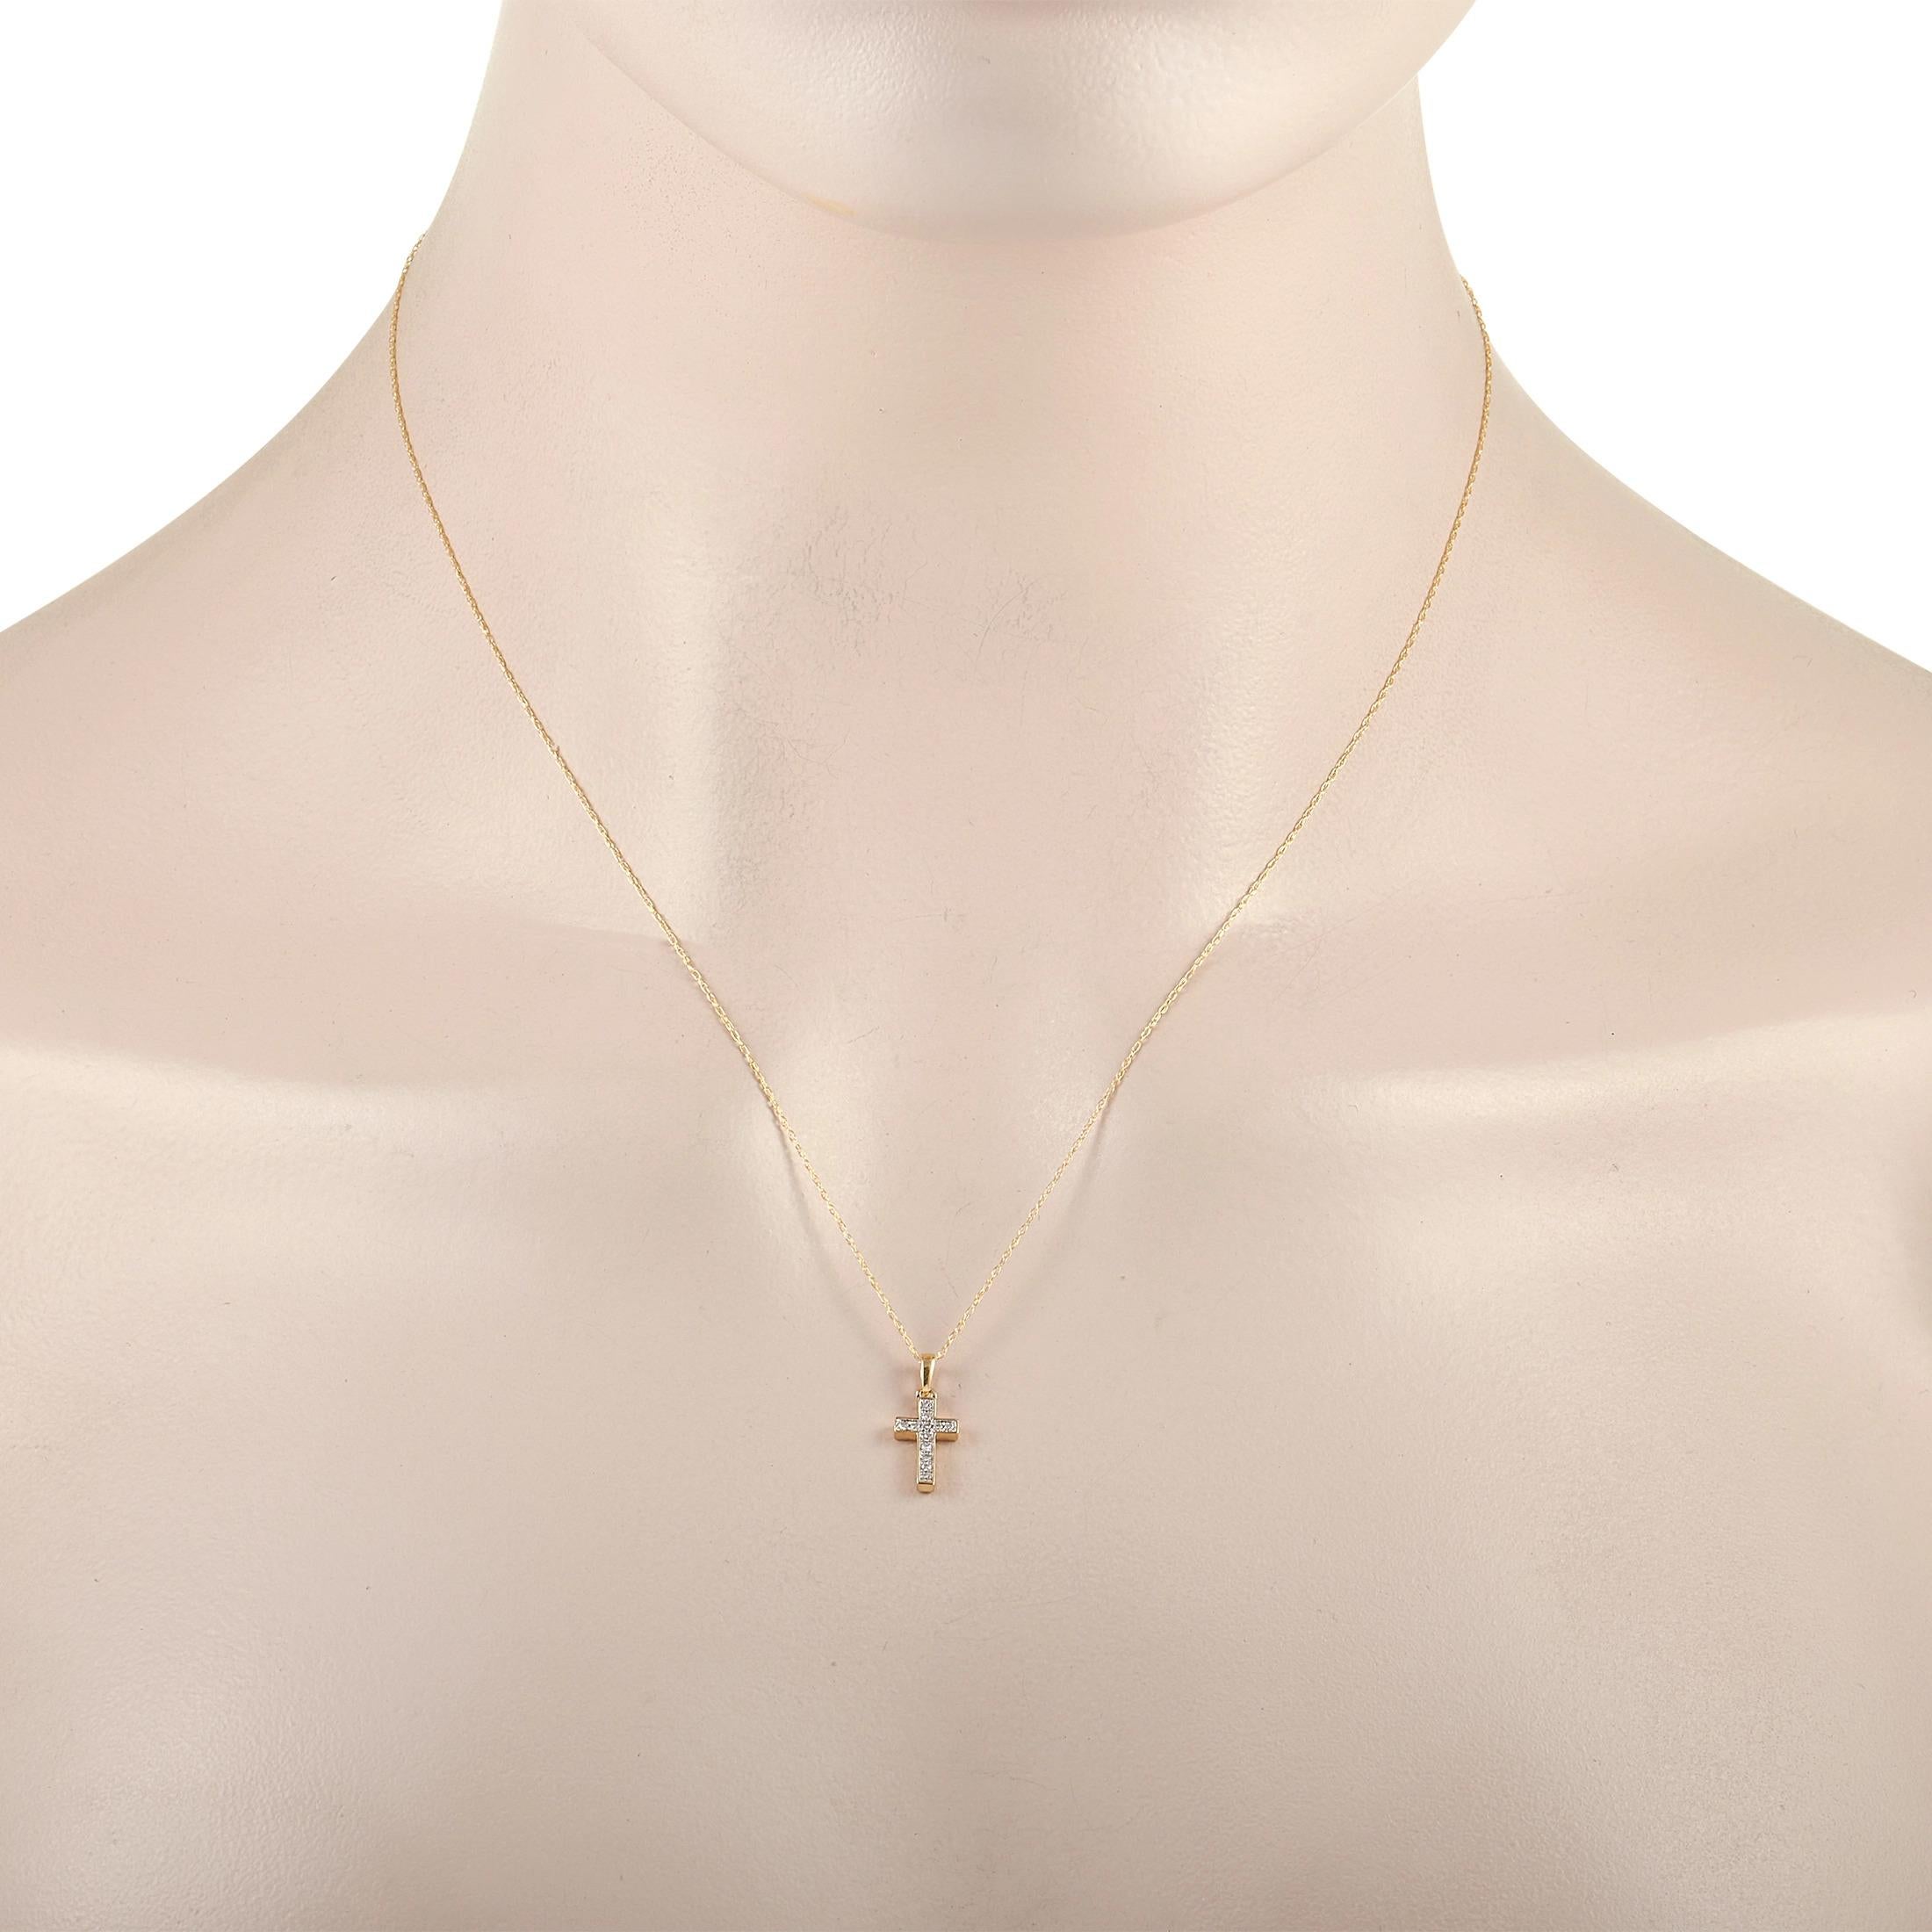 This glittering diamond cross necklace puts a luxurious twist on an iconic piece of jewelry. A 14K Yellow Gold setting contrasts beautifully with the sleek, elegant cross shaped pendant measuring .63” long and .25” wide. It’s suspended from a 17.5”